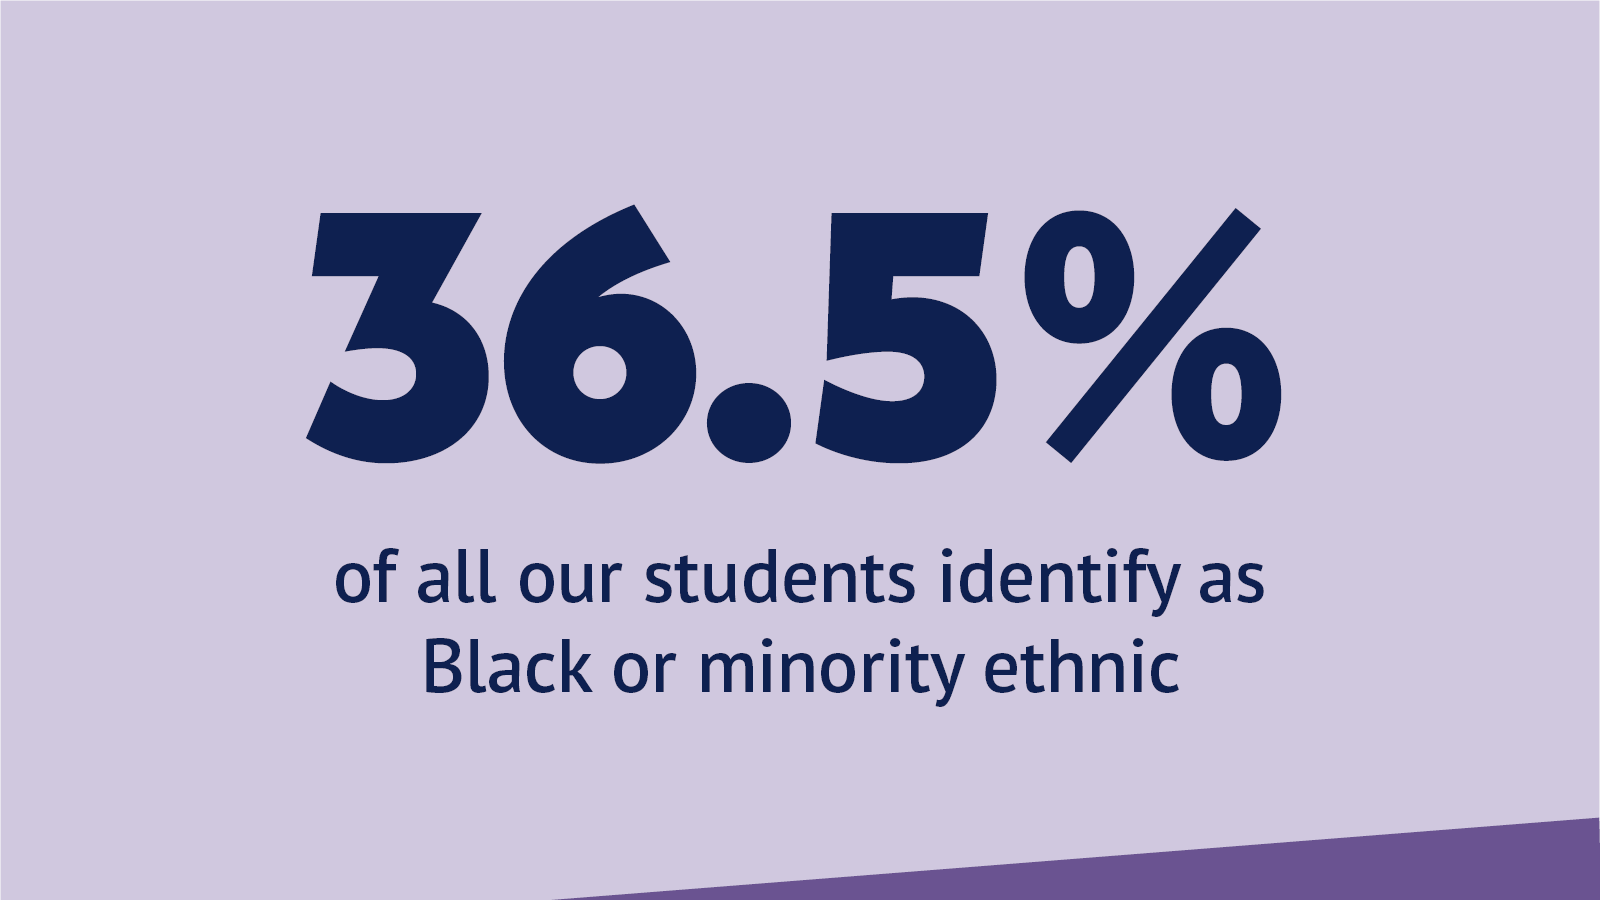 36.5% of all our students identify as Black or minority ethnic